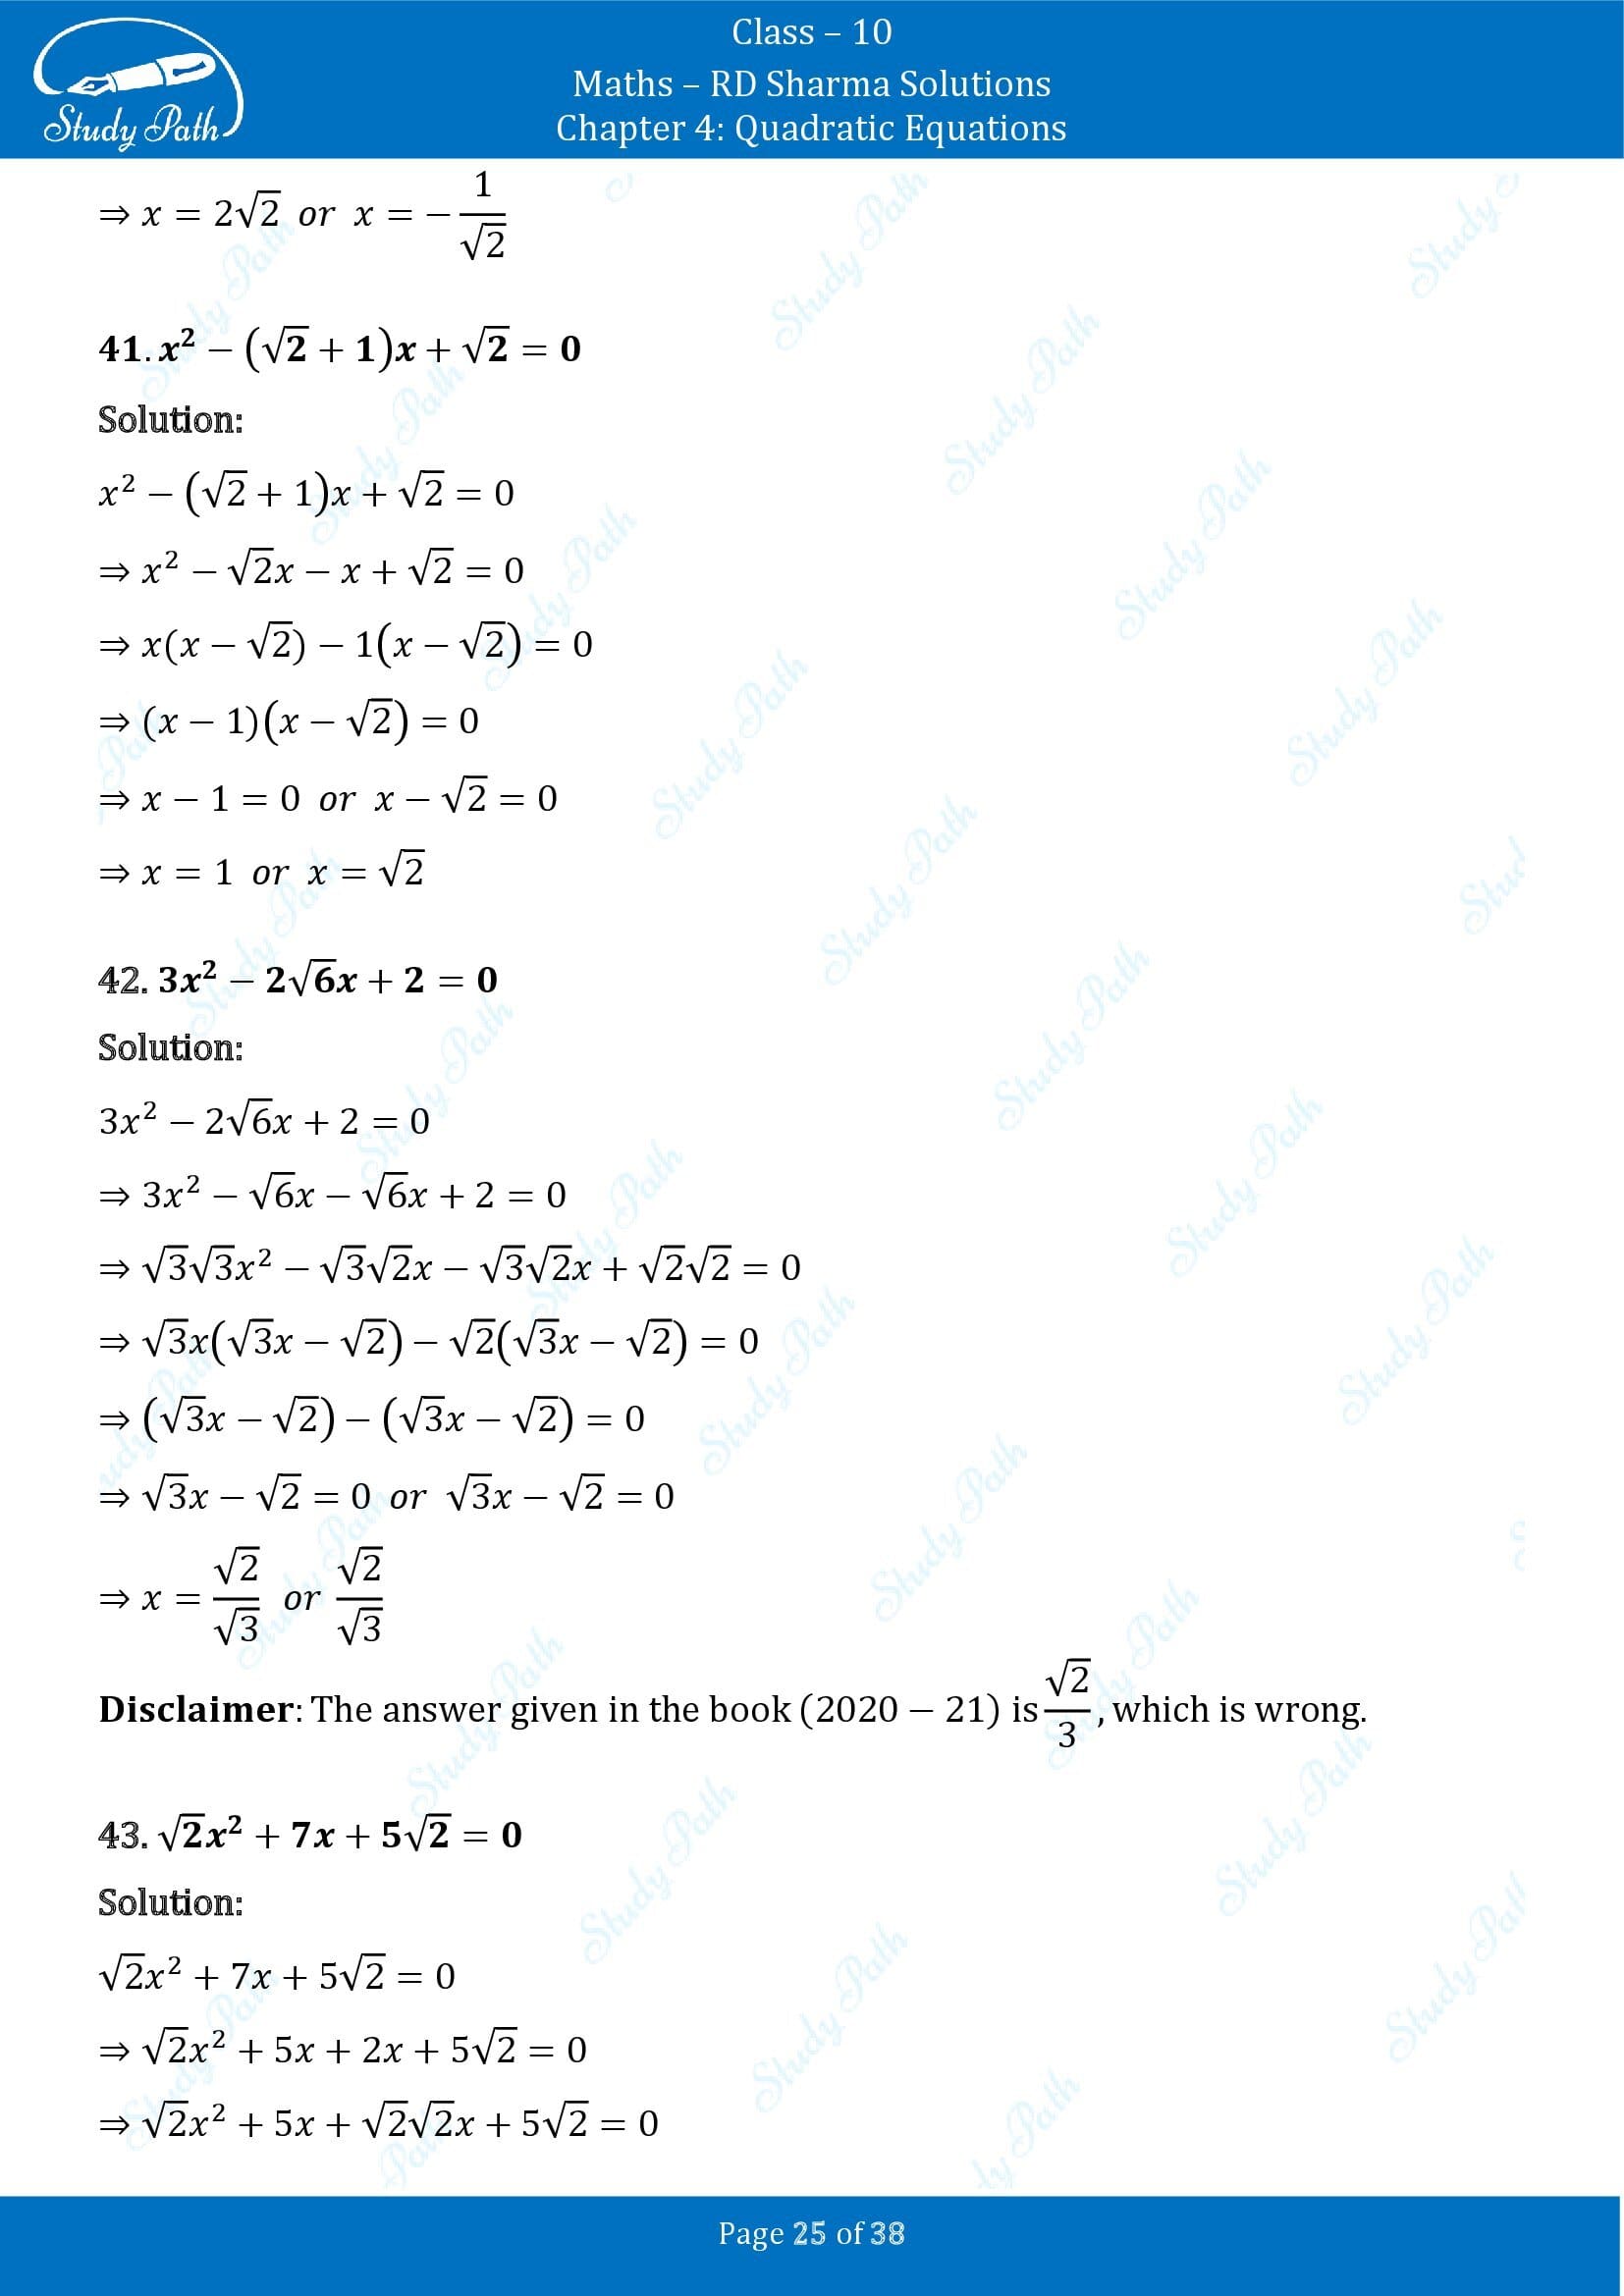 RD Sharma Solutions Class 10 Chapter 4 Quadratic Equations Exercise 4.3 00025